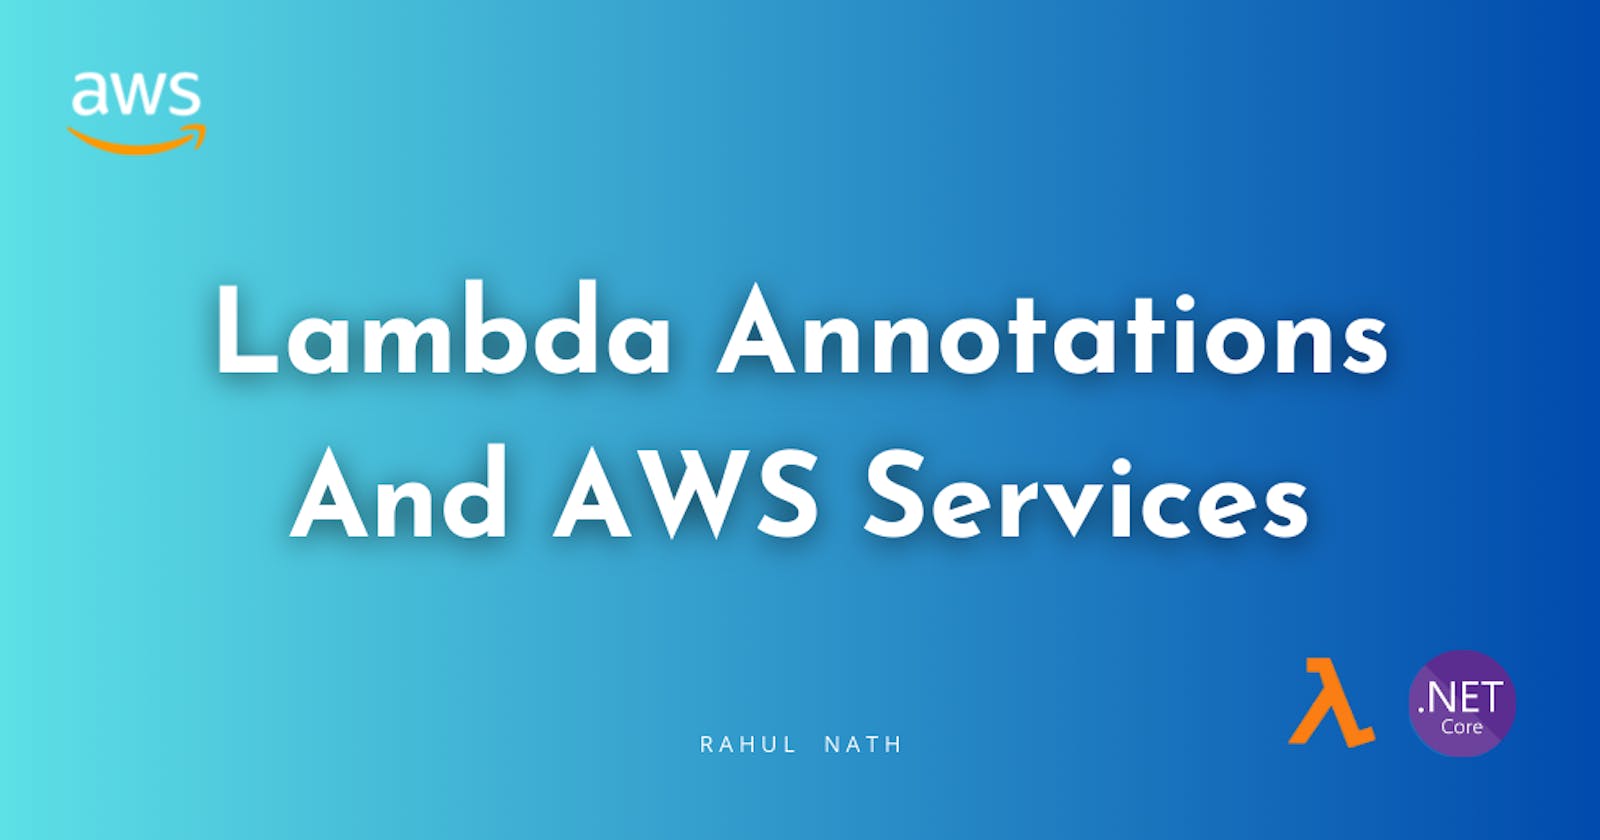 Learn How to Easily Integrate Lambda Annotations and Other AWS Services